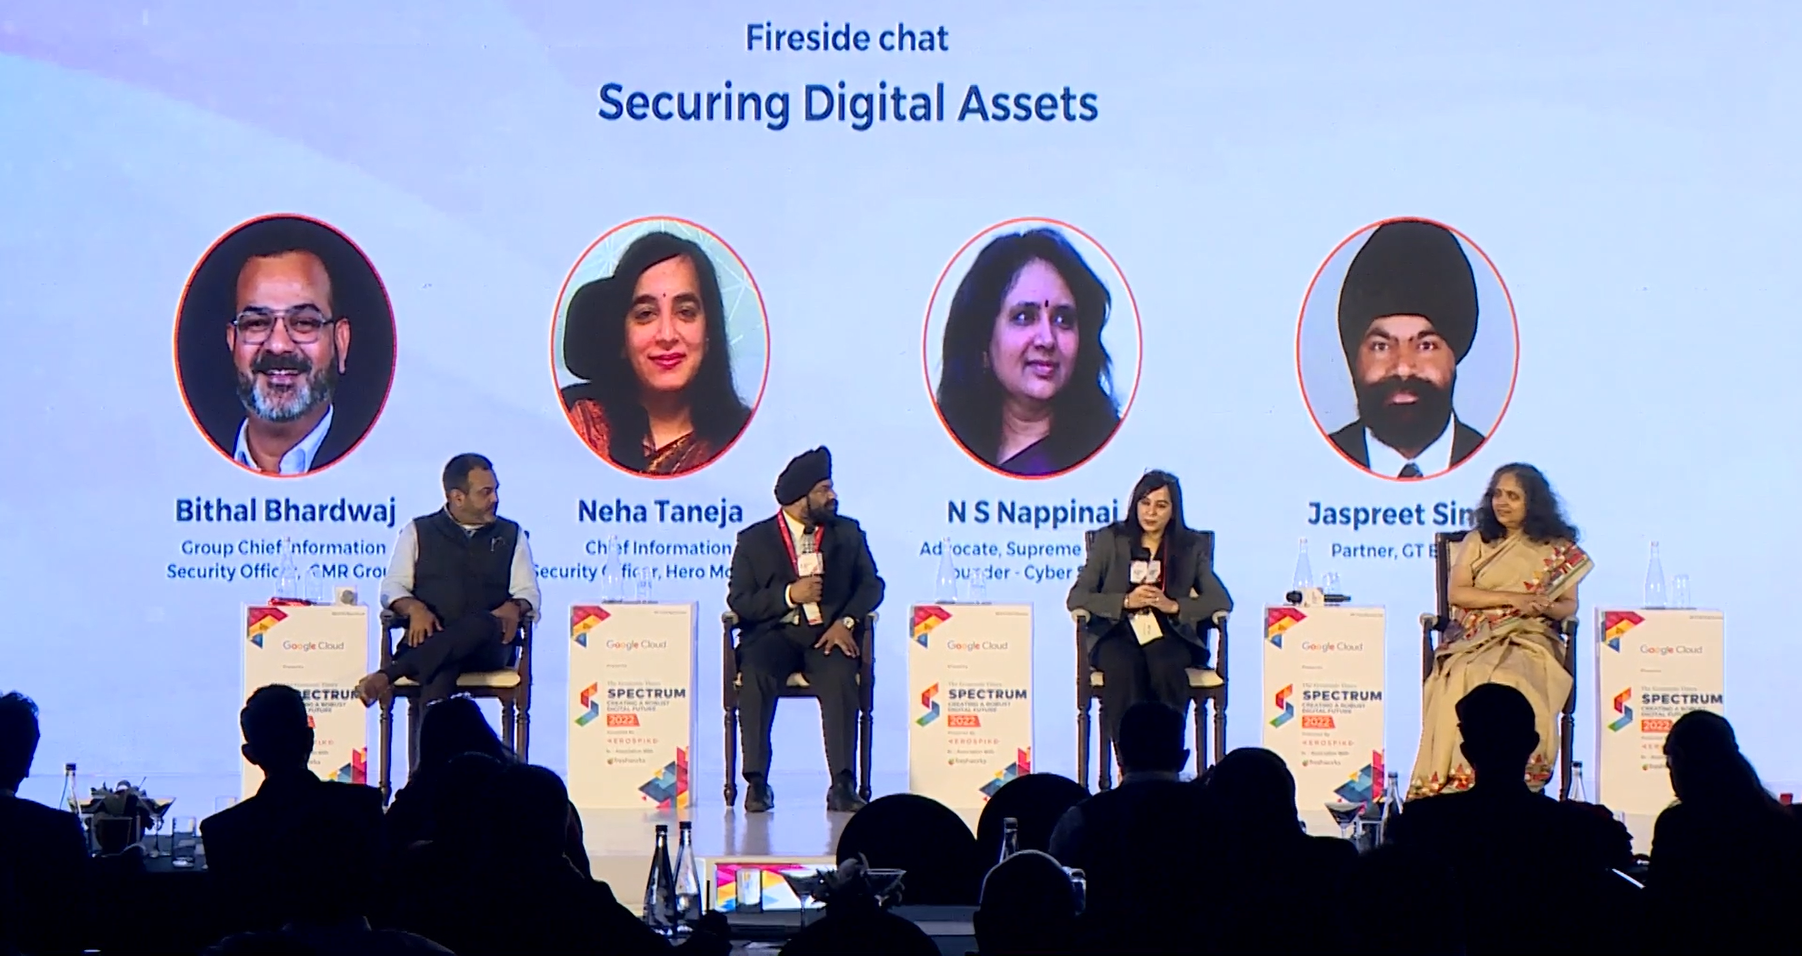 Experts' opinion on securing digital assets